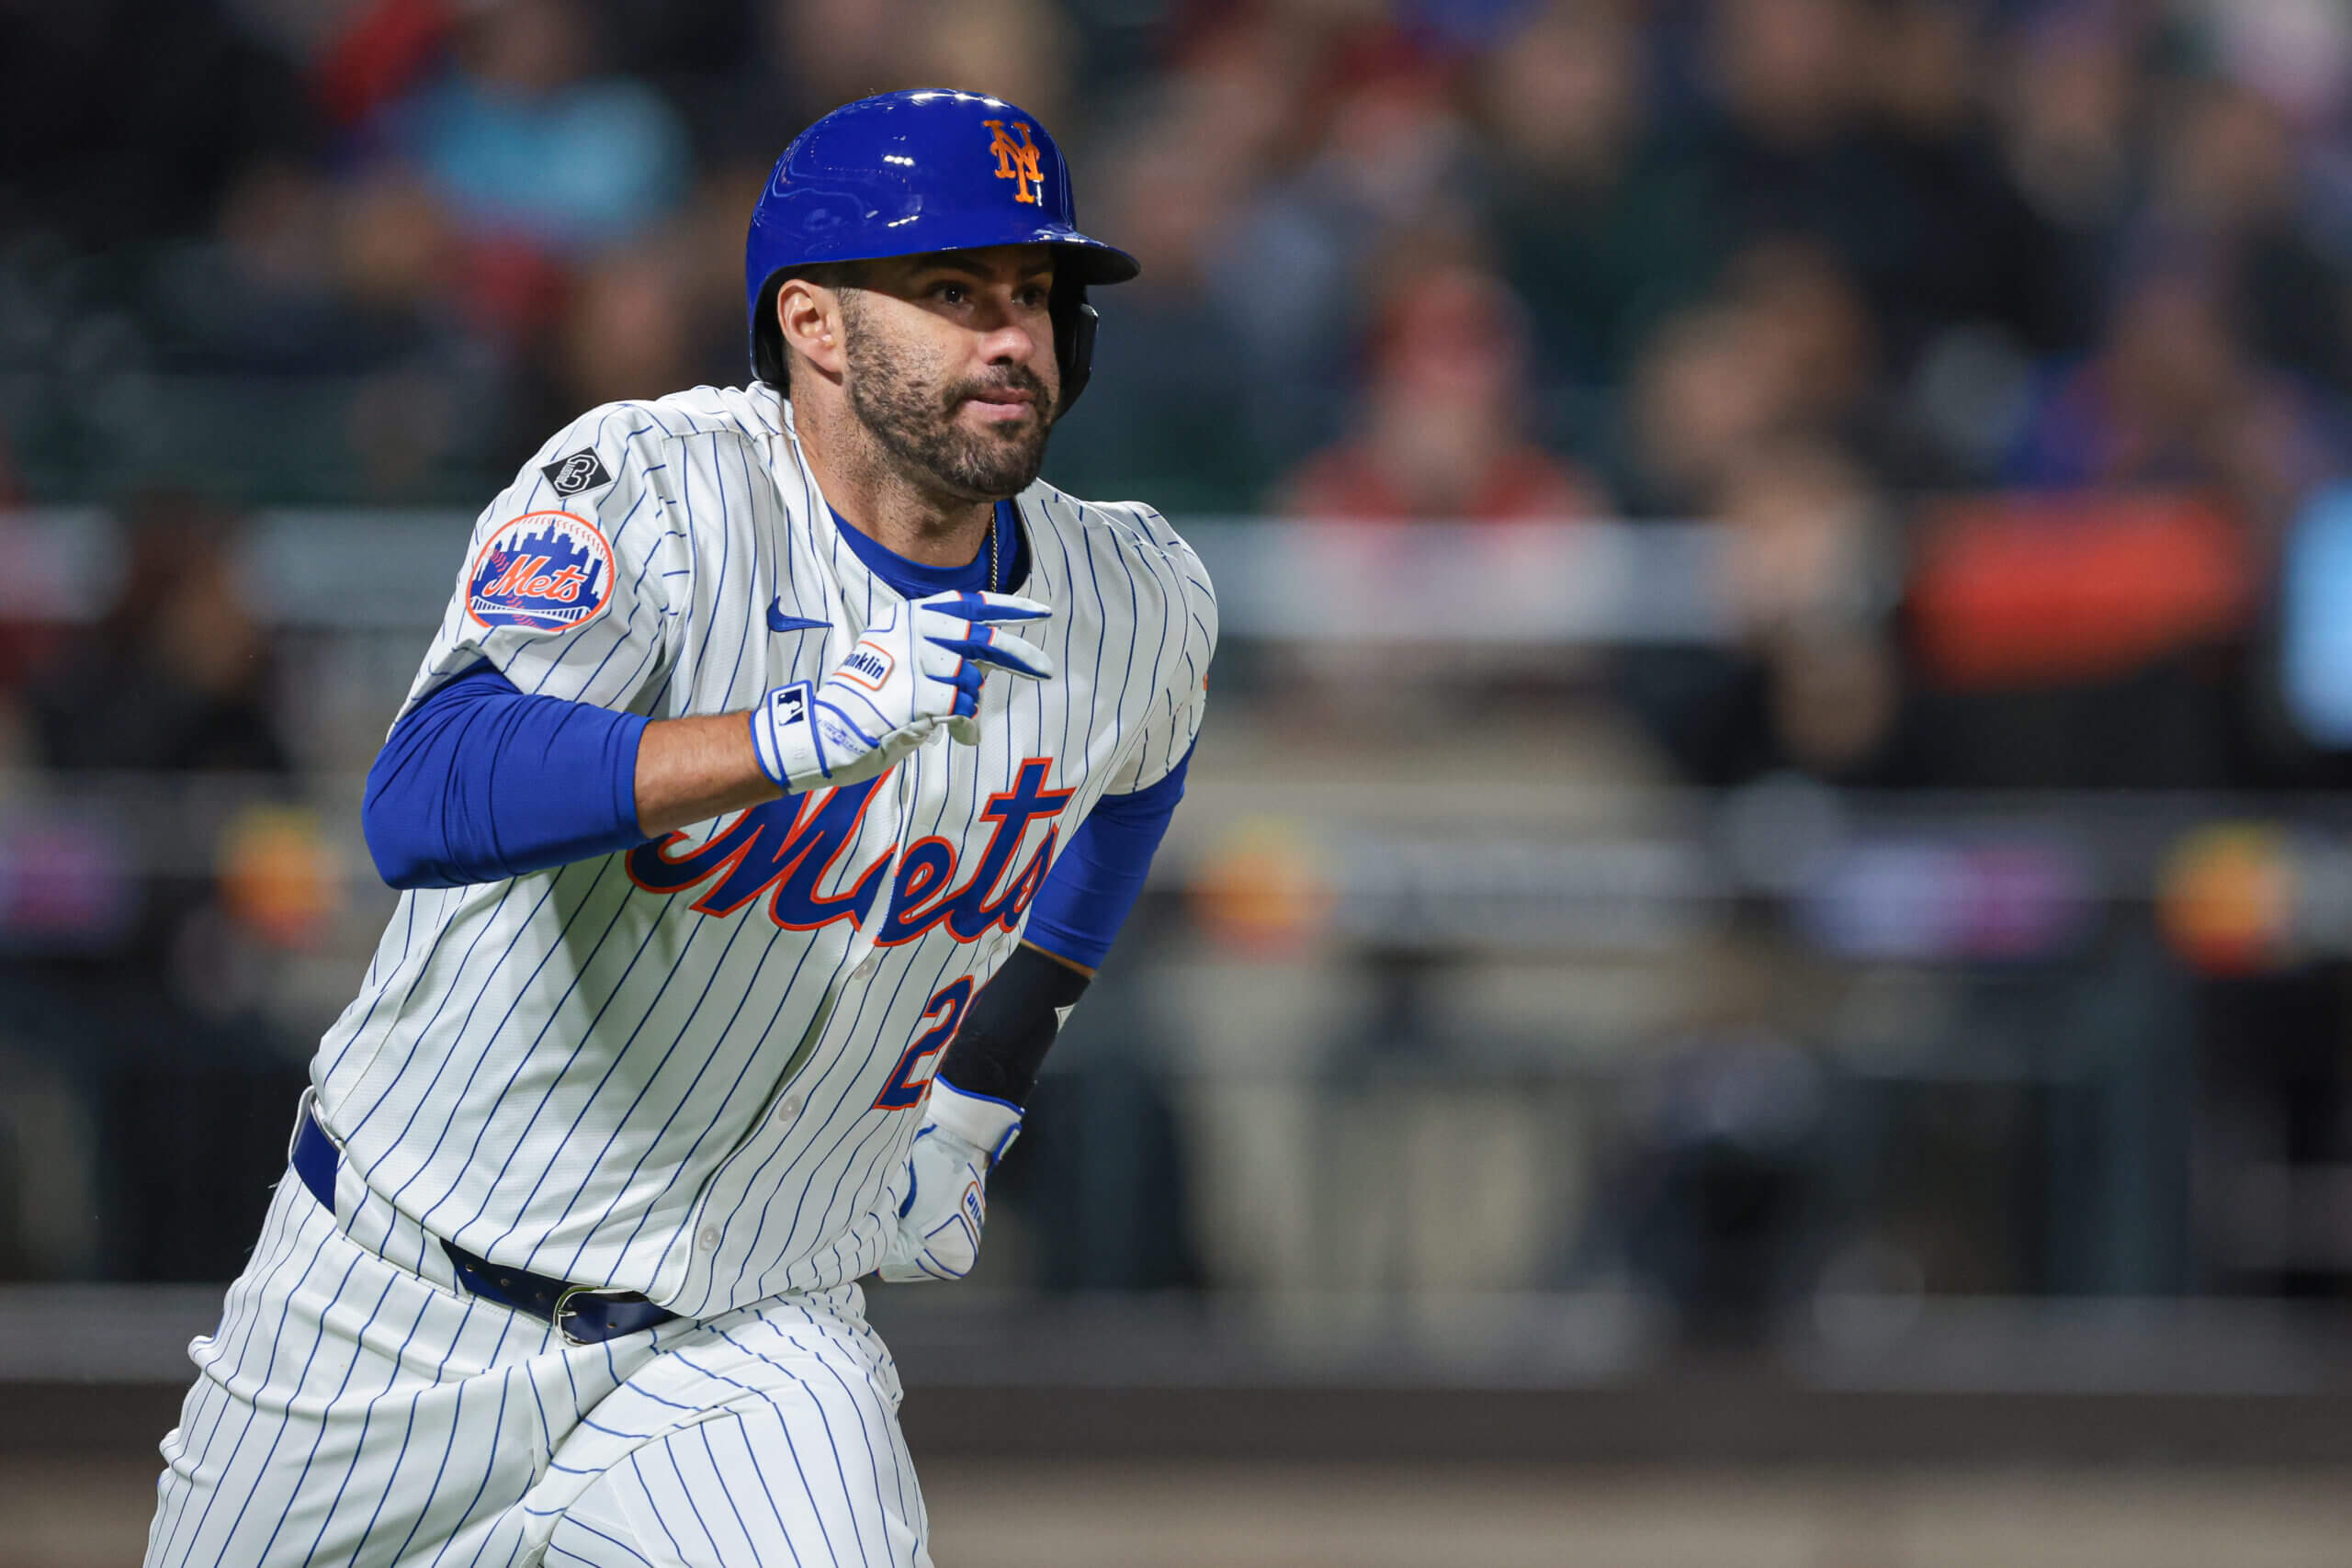 How J.D. Martinez’s presence may impact the Mets’ lineup and roster